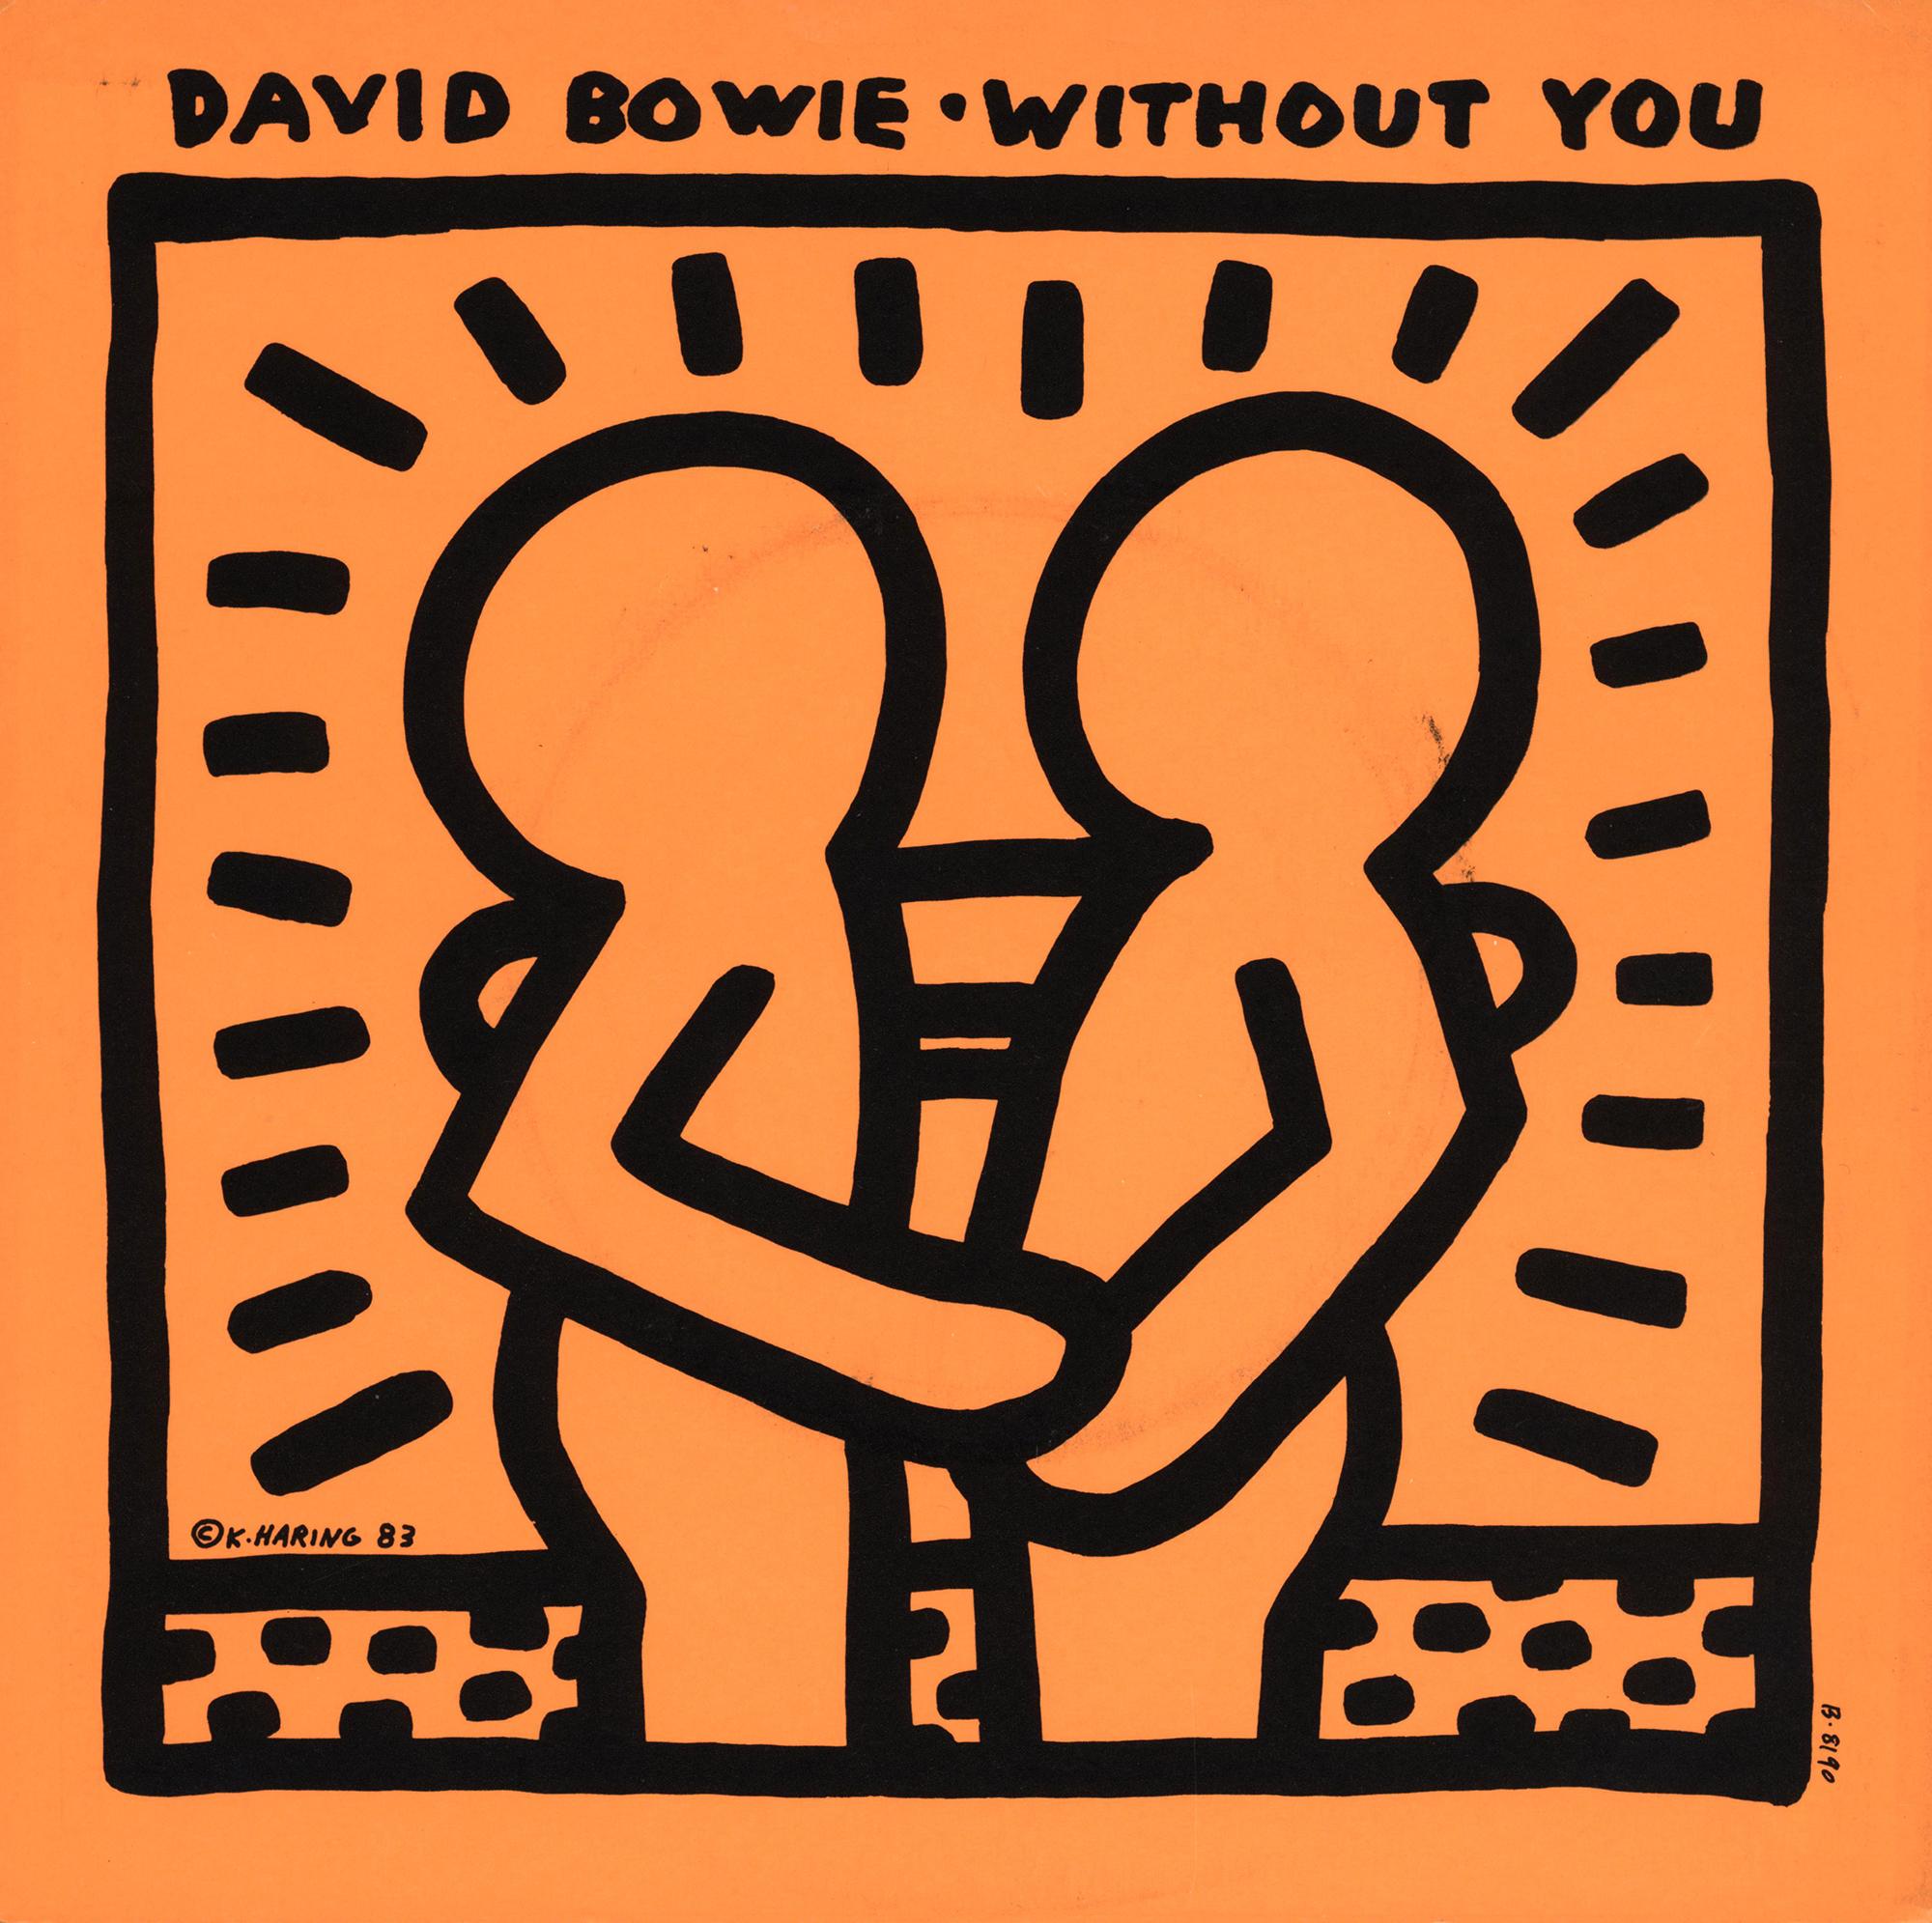 1980s Keith Haring Record Art:
David BOWIE "Without You" A Rare Highly Sought After Vinyl Art Cover featuring original cover artwork by Keith Haring.

Year: 1983.

Medium: Off-Set Lithograph.

Dimensions: 7 x 7 inches.

Cover: Light ring wear; good